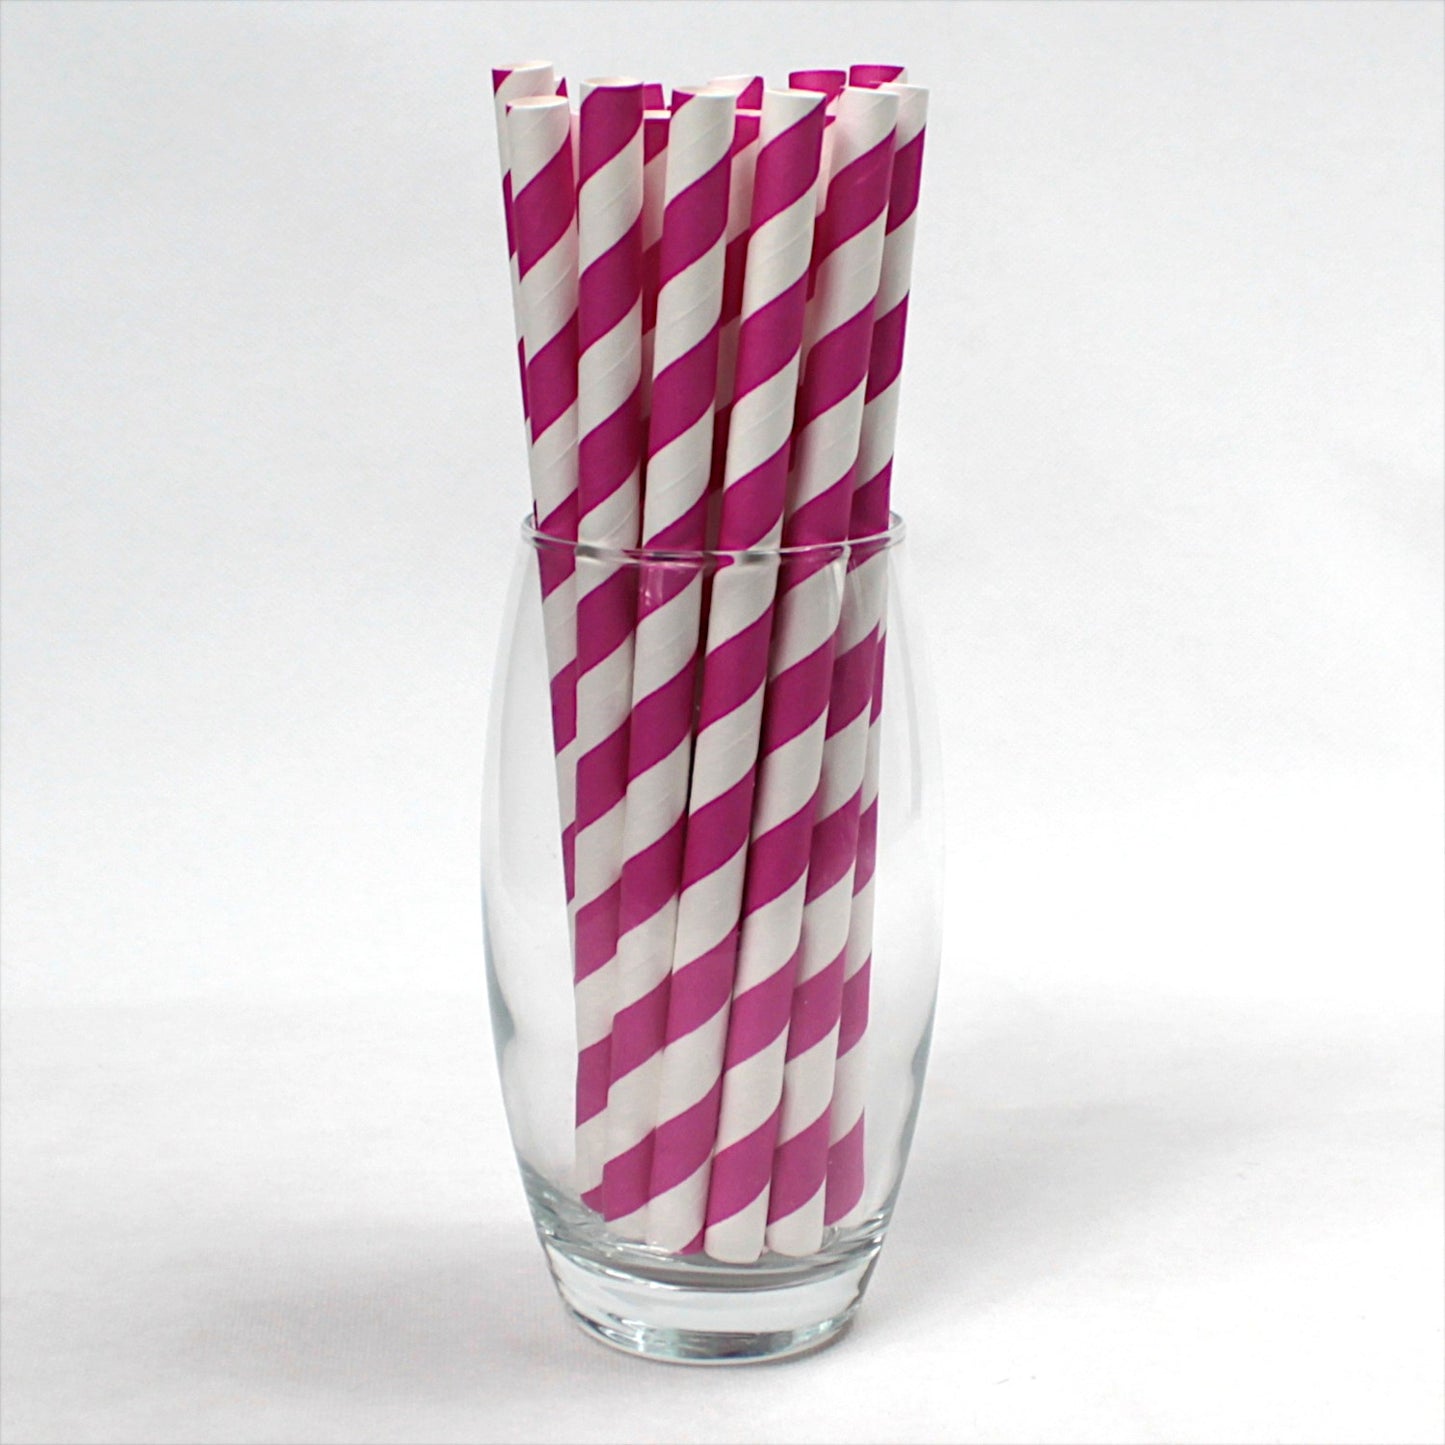 Pink & White Striped Paper Straws (10mm x 200mm) - Quality Drinking Straws for Smoothies and Milkshakes - Intrinsic Paper Straws